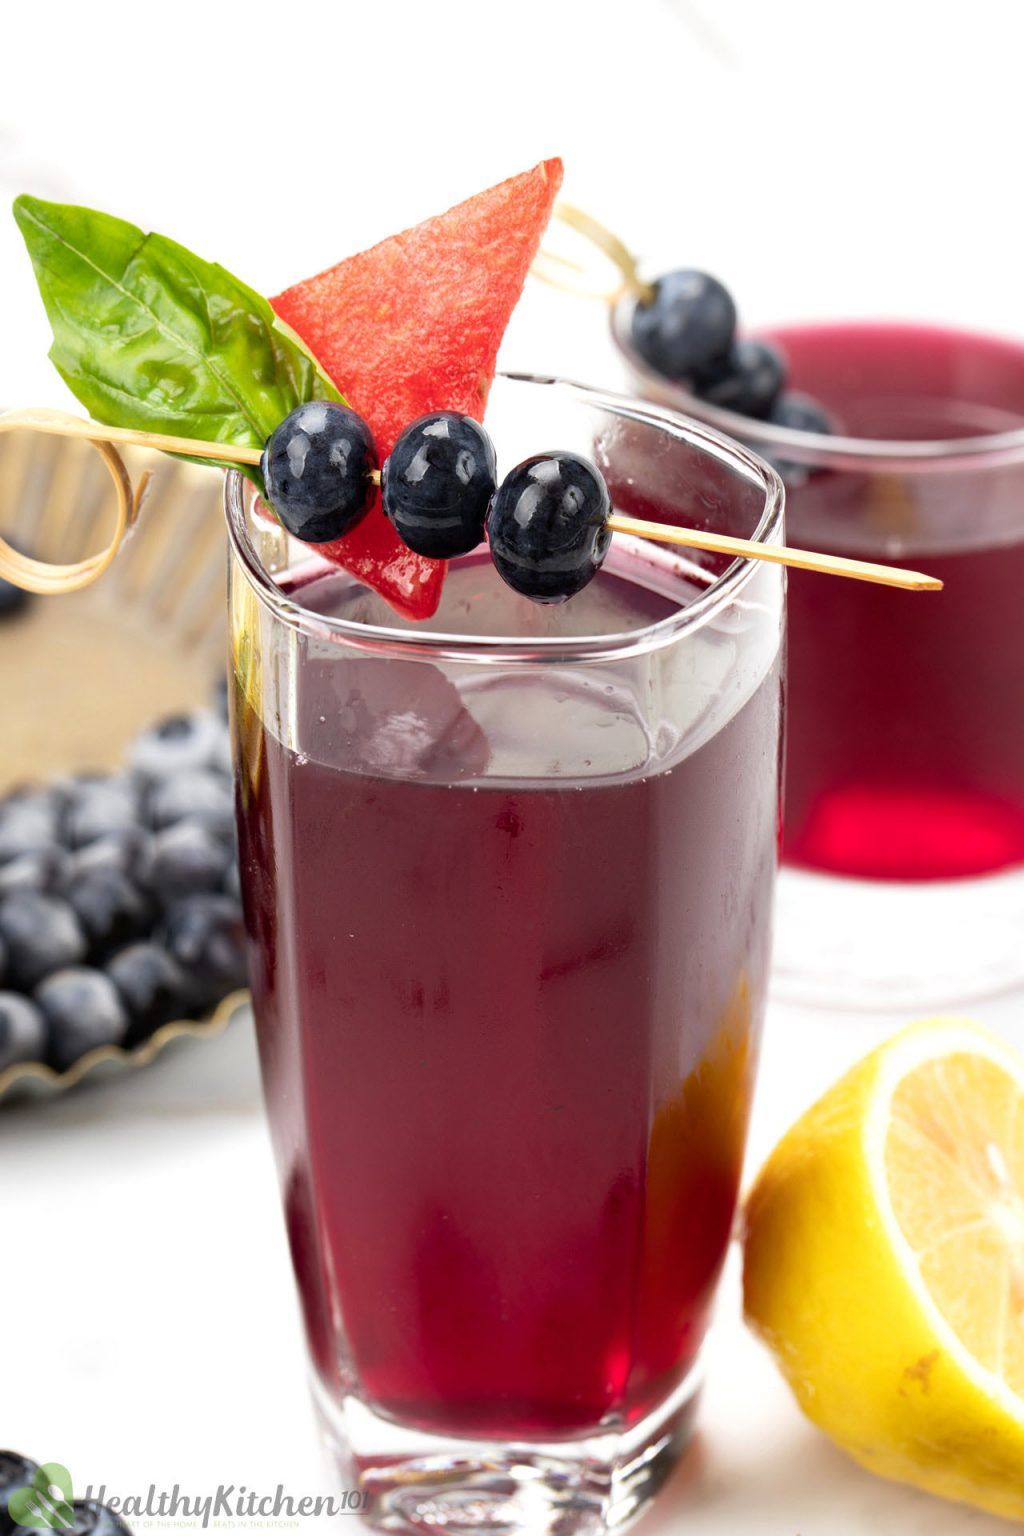 Top 10 Blueberry Juice Recipes - Inspiring And No-Fussy Juicing Ideas